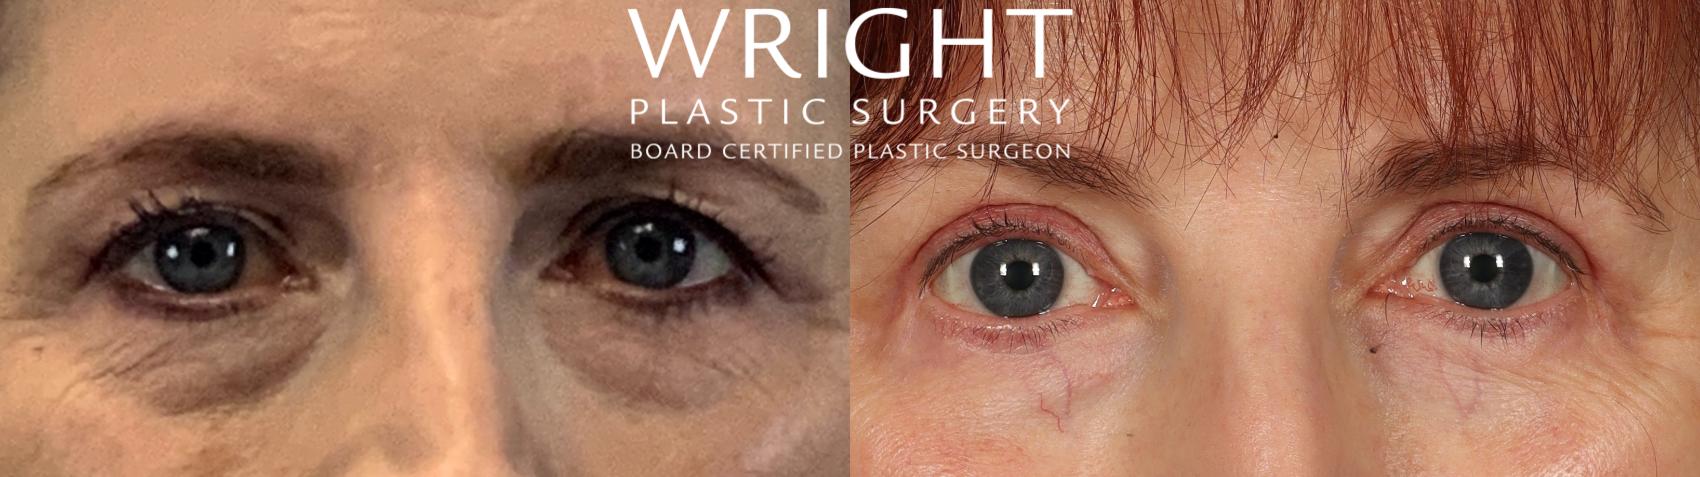 Before & After Blepharoplasty Case 474 Front View in Little Rock, Arkansas